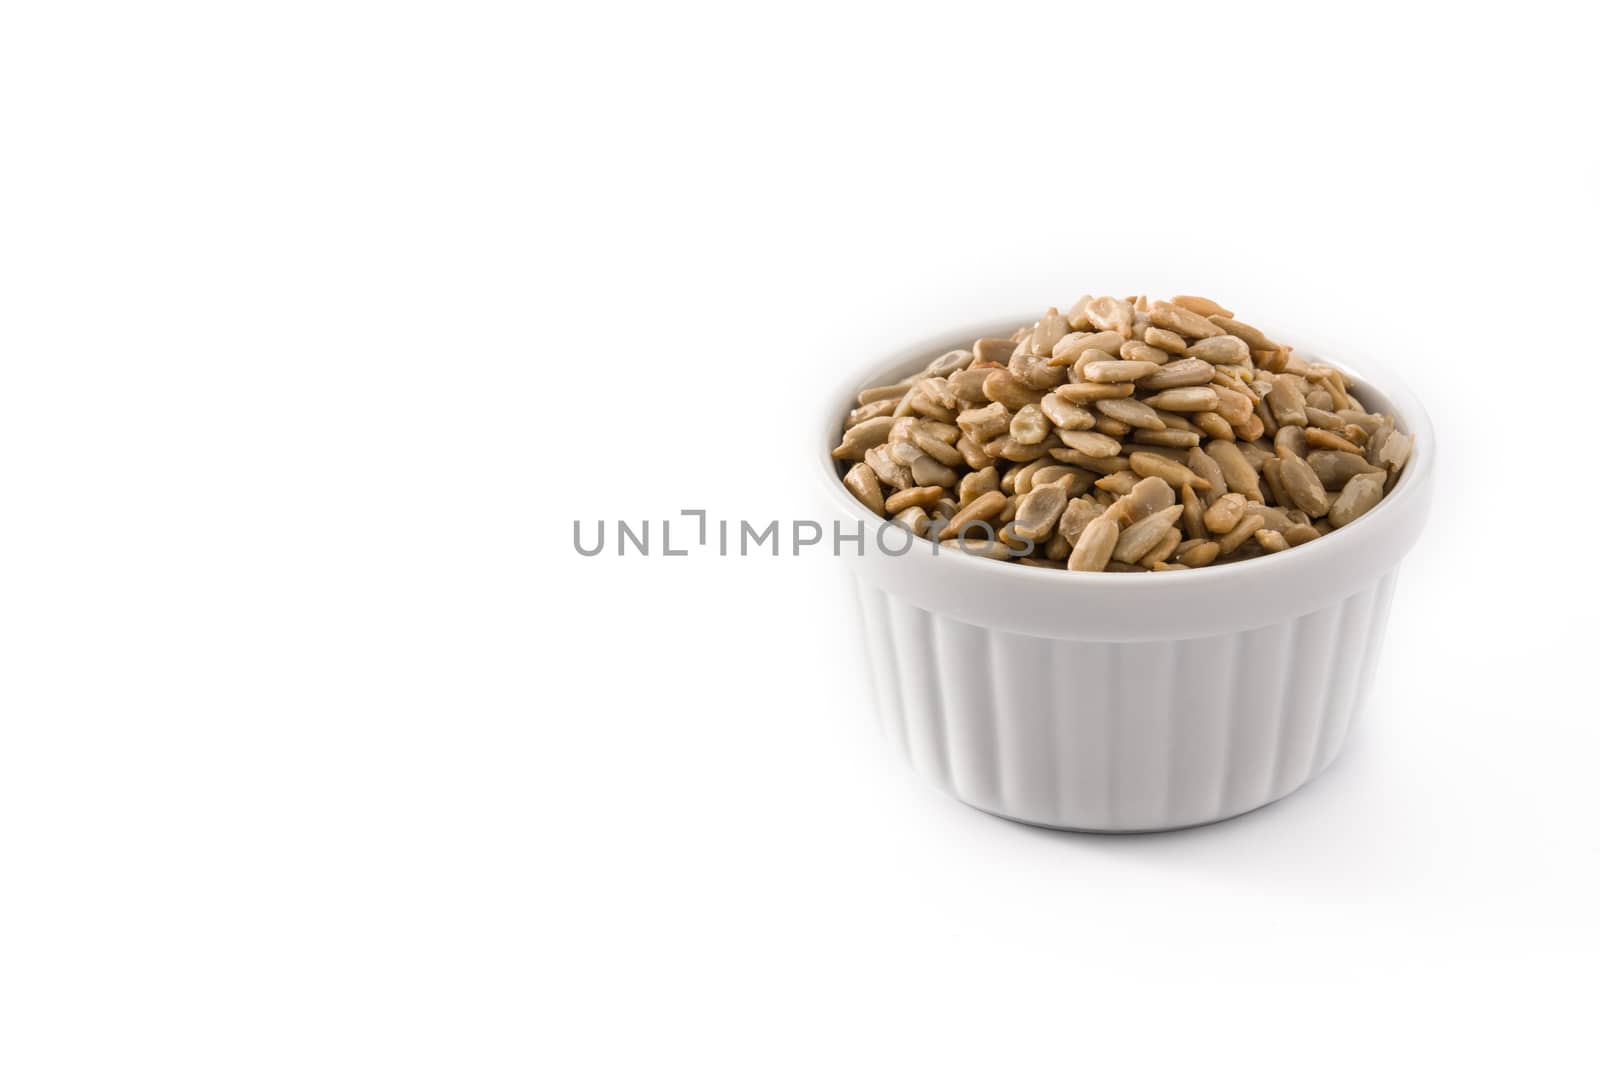 Sunflower seeds in bowl by chandlervid85